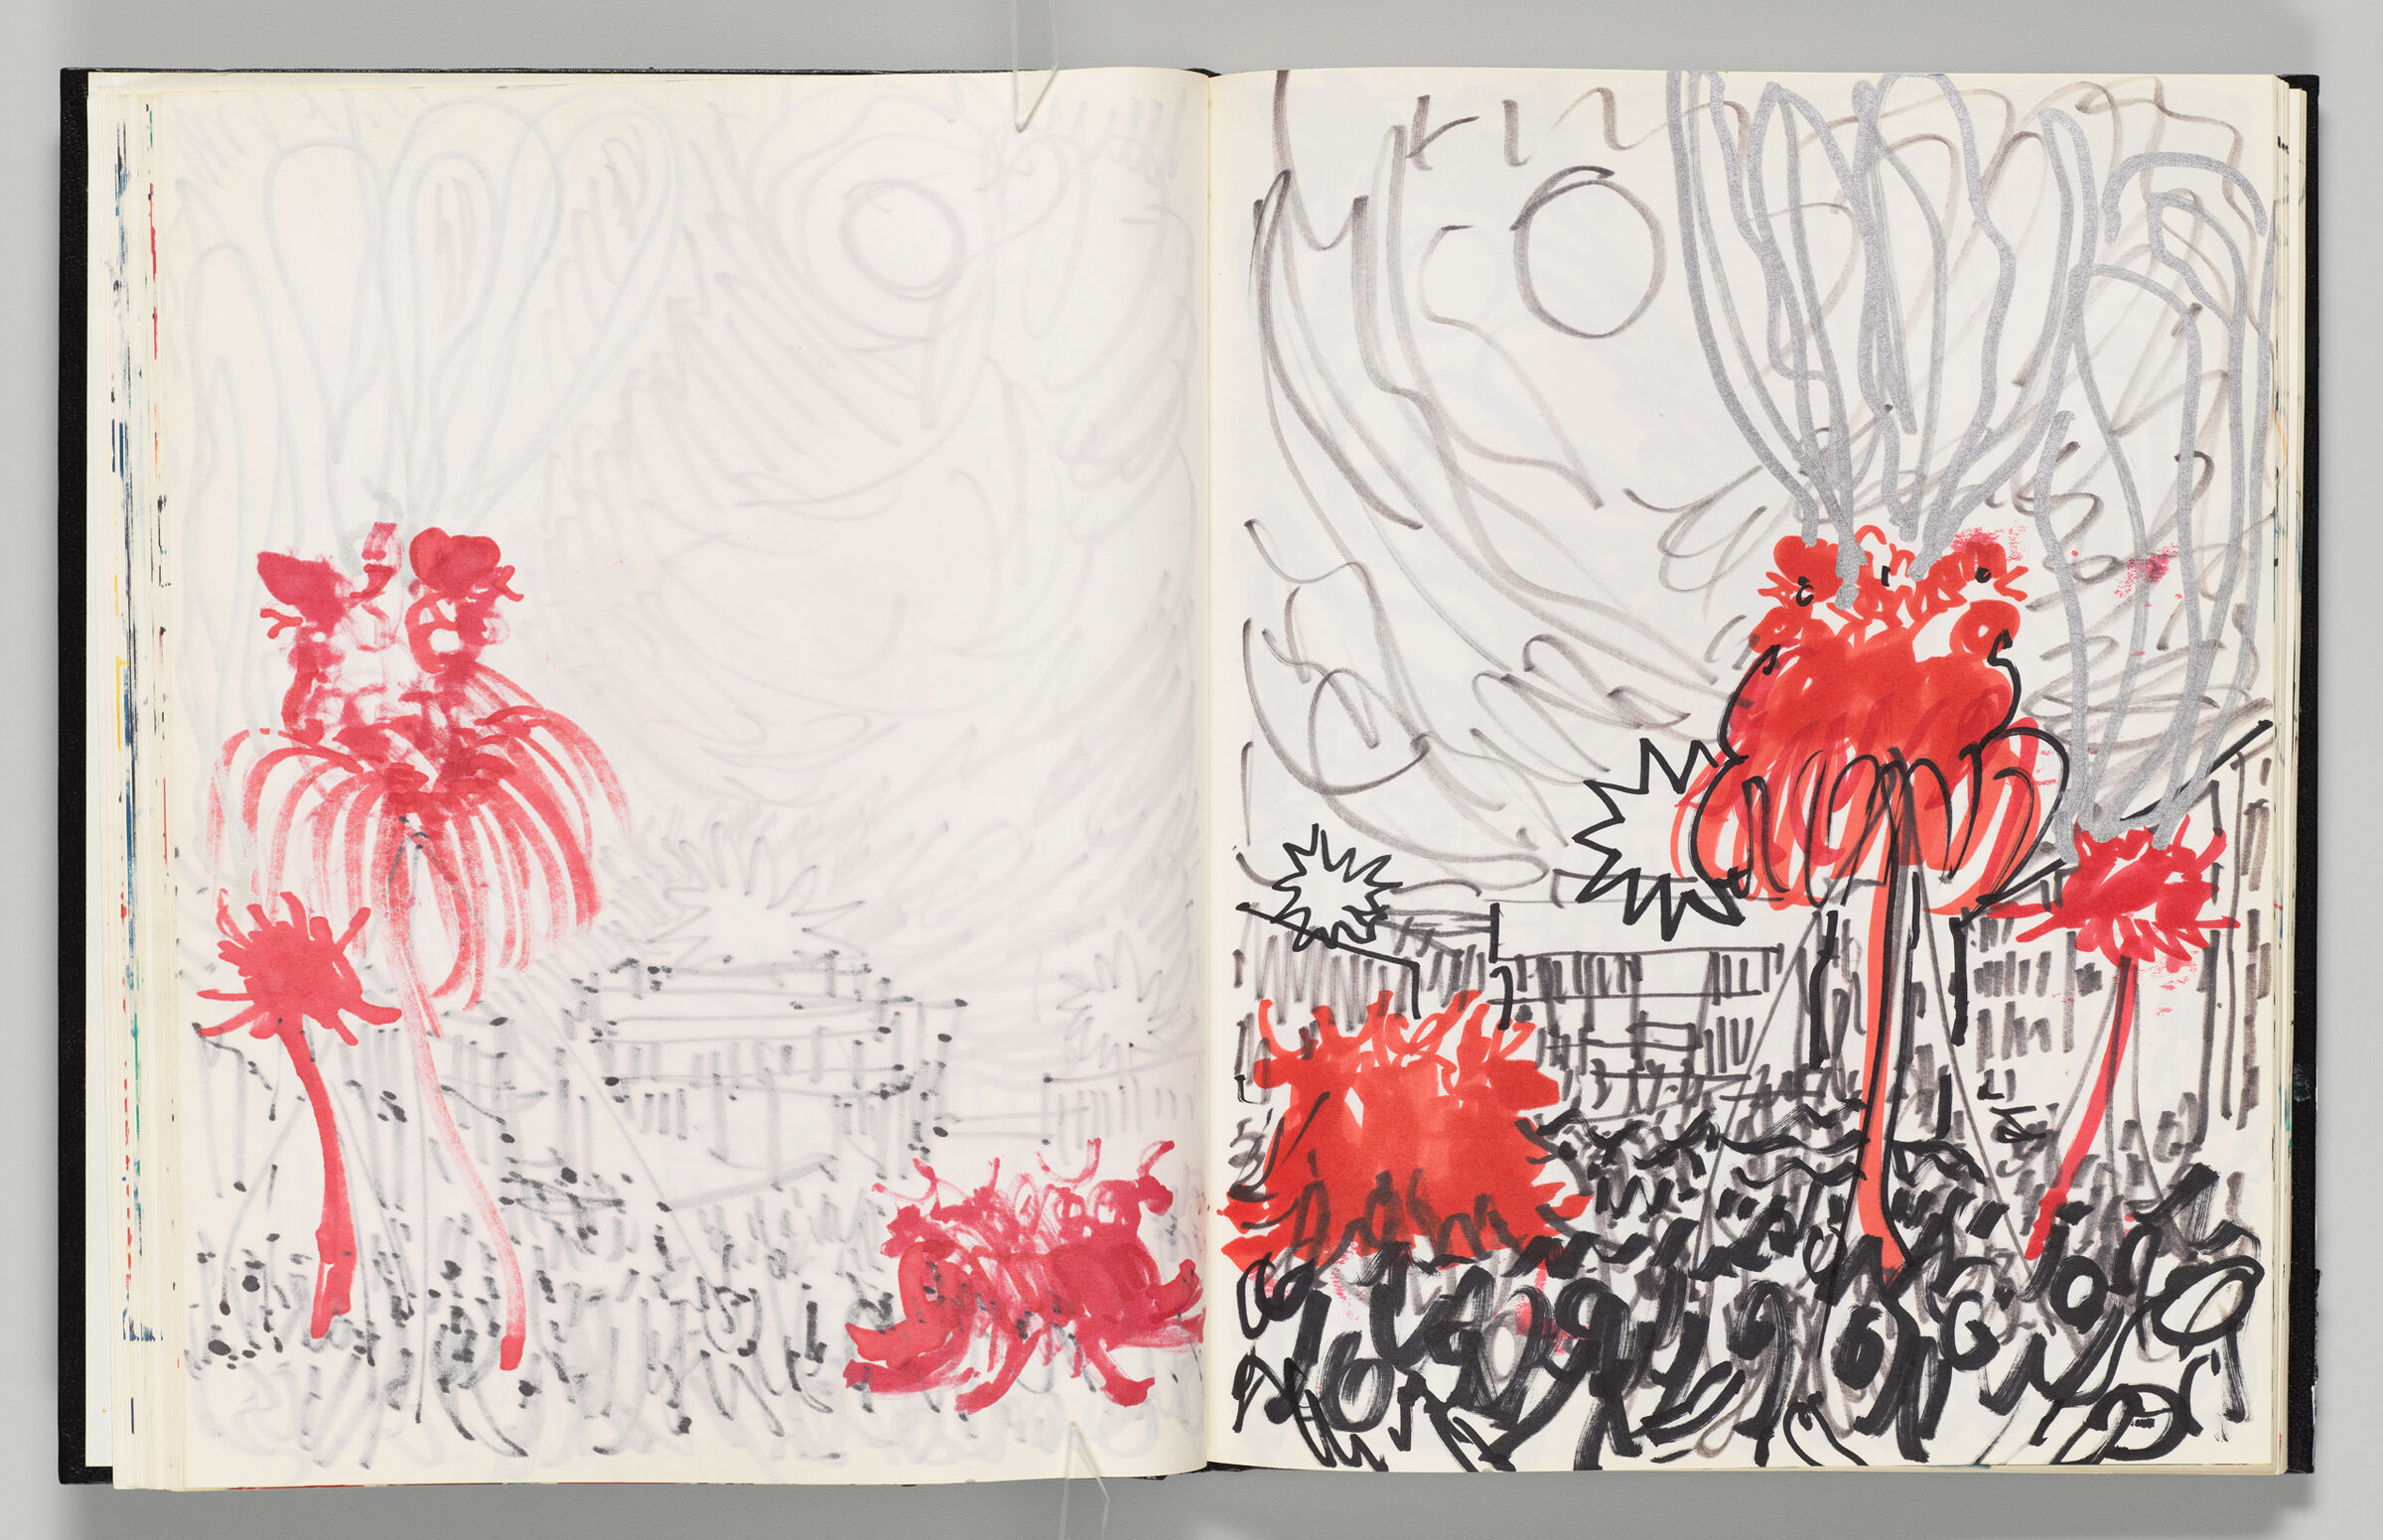 Untitled (Bleed-Through Of Previous Page, Left Page); Untitled (First Night 